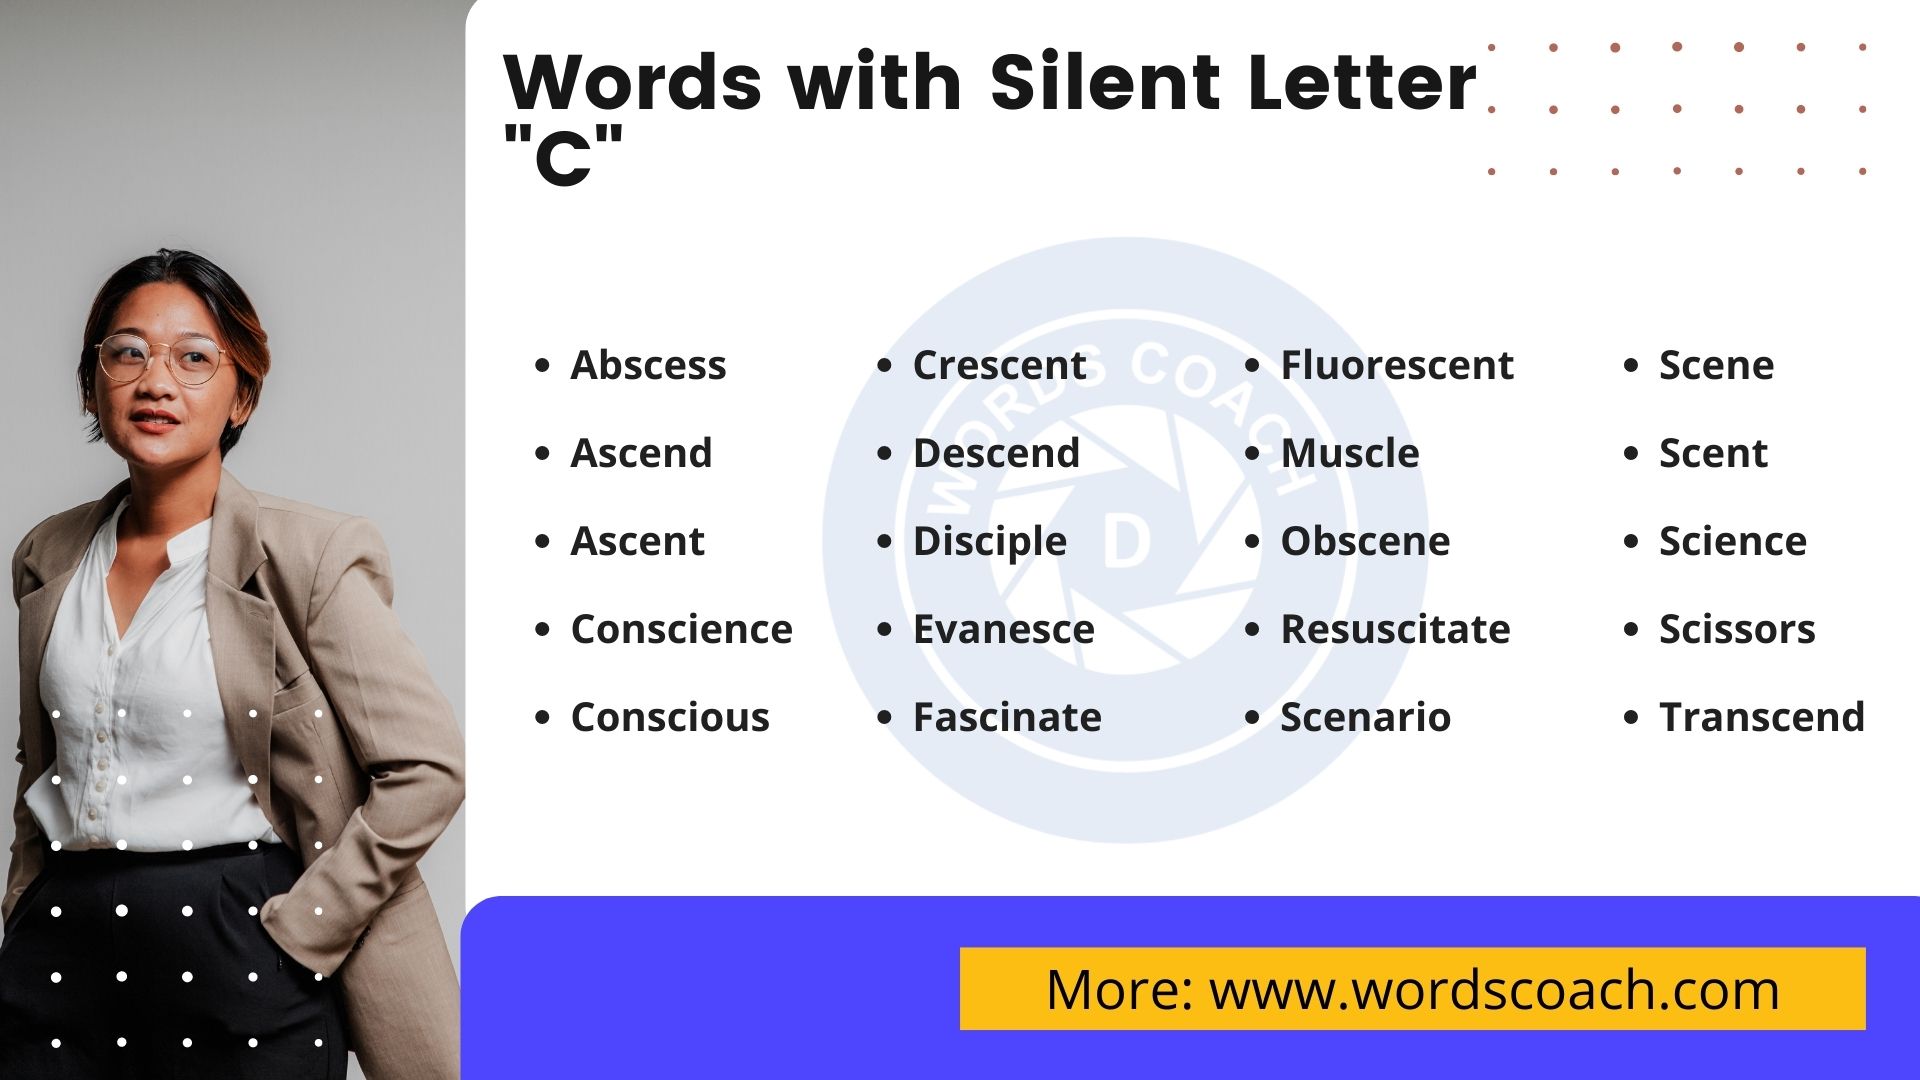 Words with Silent Letter C - wordscoach.com